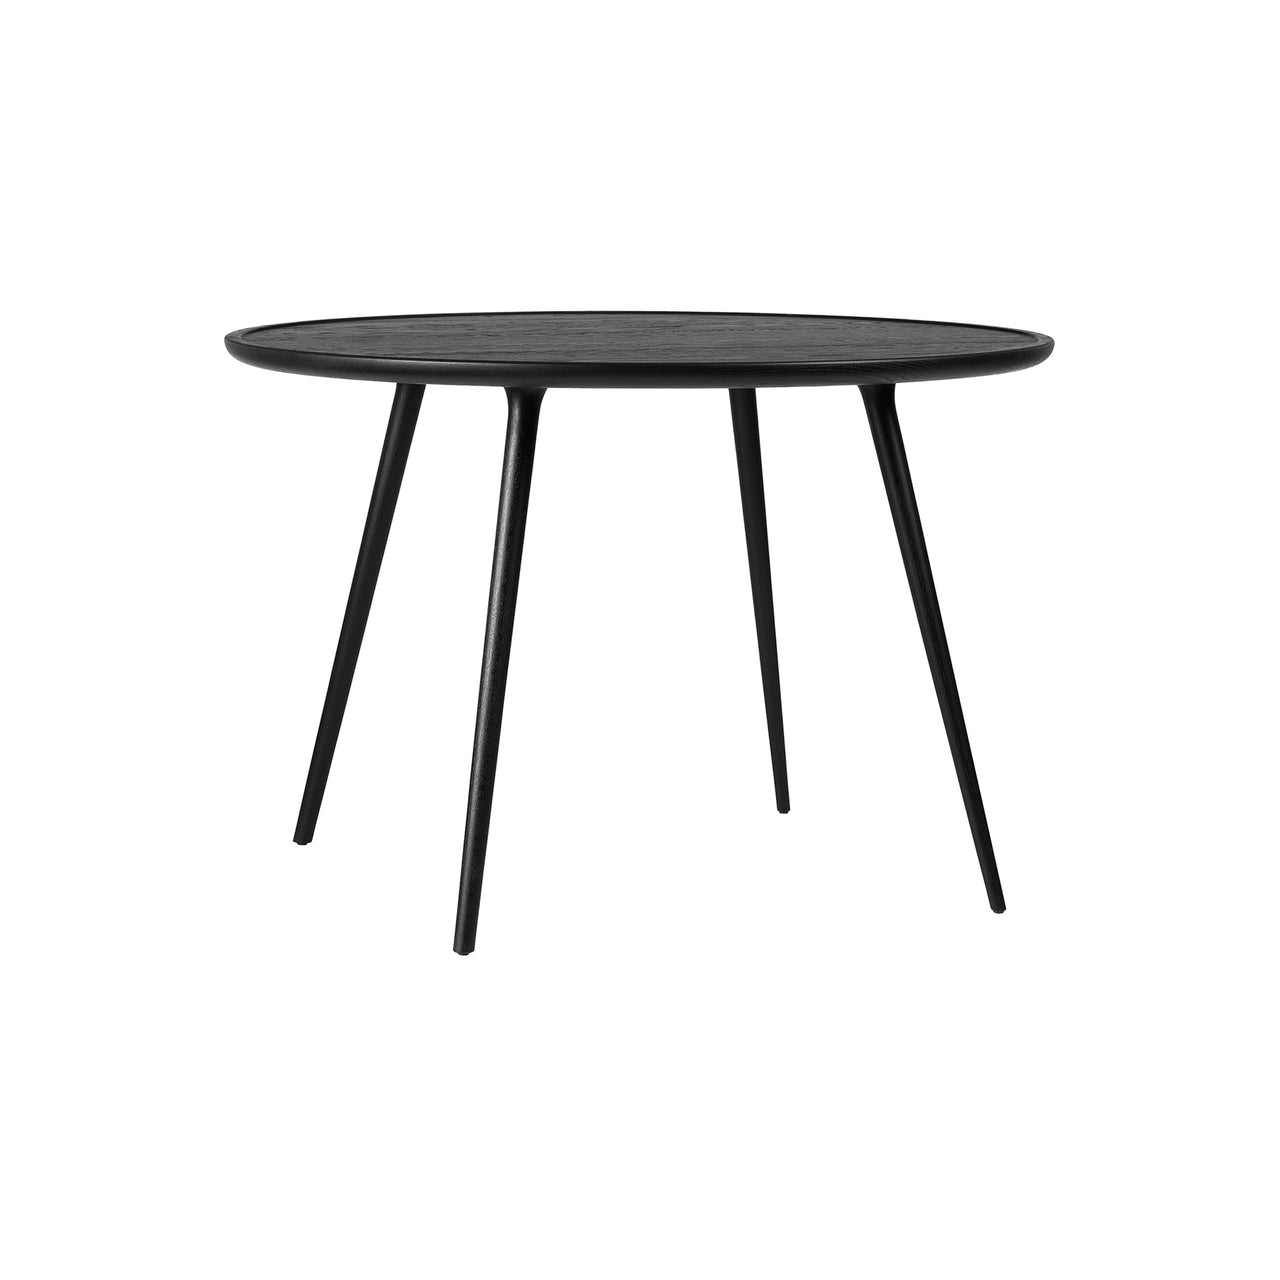 Accent Dining Table: Small - 43.3